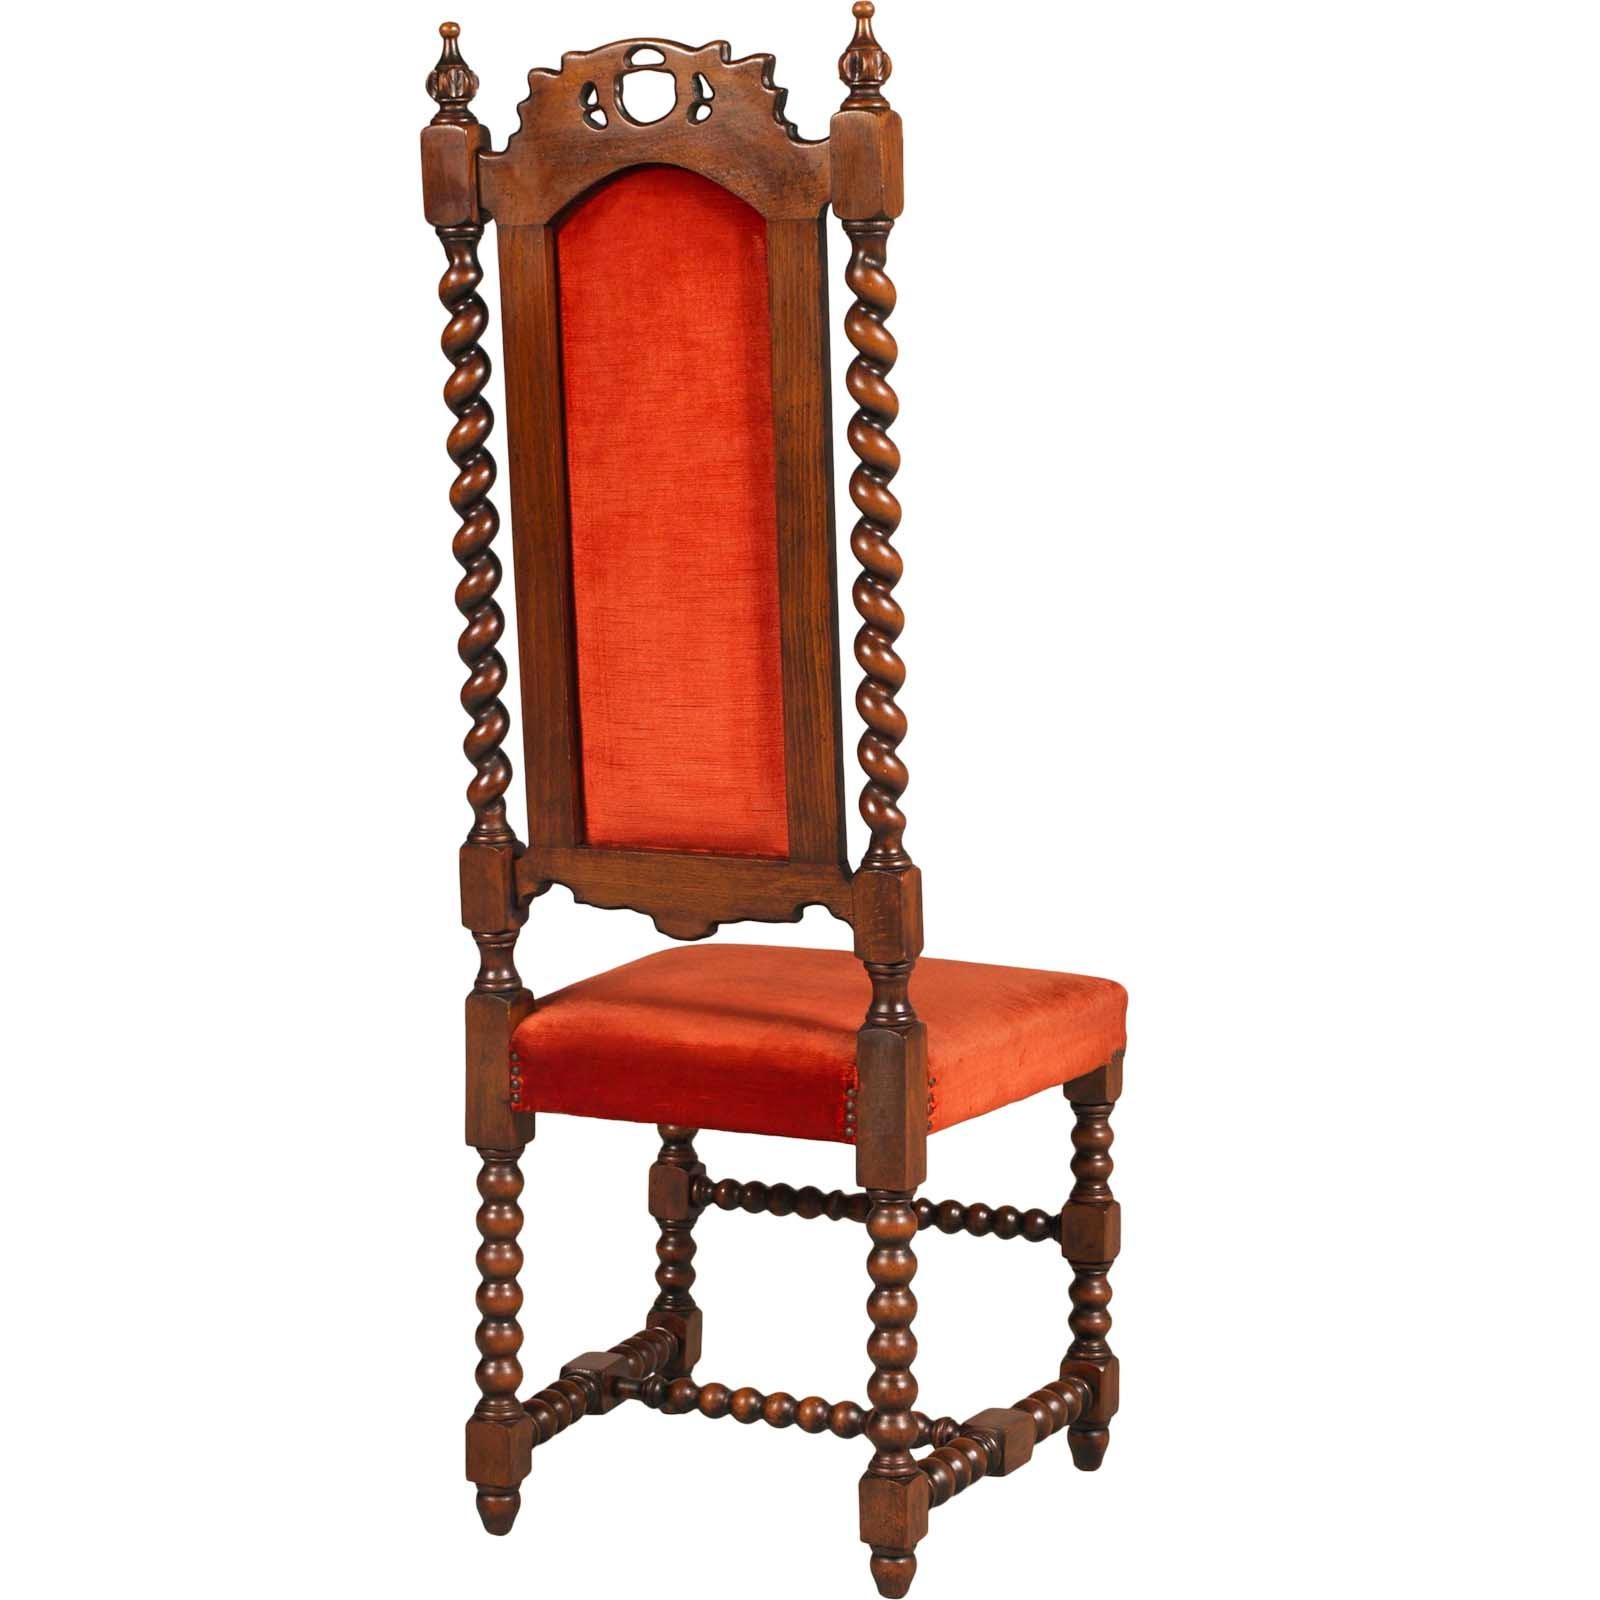 Baroque Revival Pairs 19th Century Venetian Hall Chairs by Atelier Cadorin, Walnut , Hand Carved For Sale